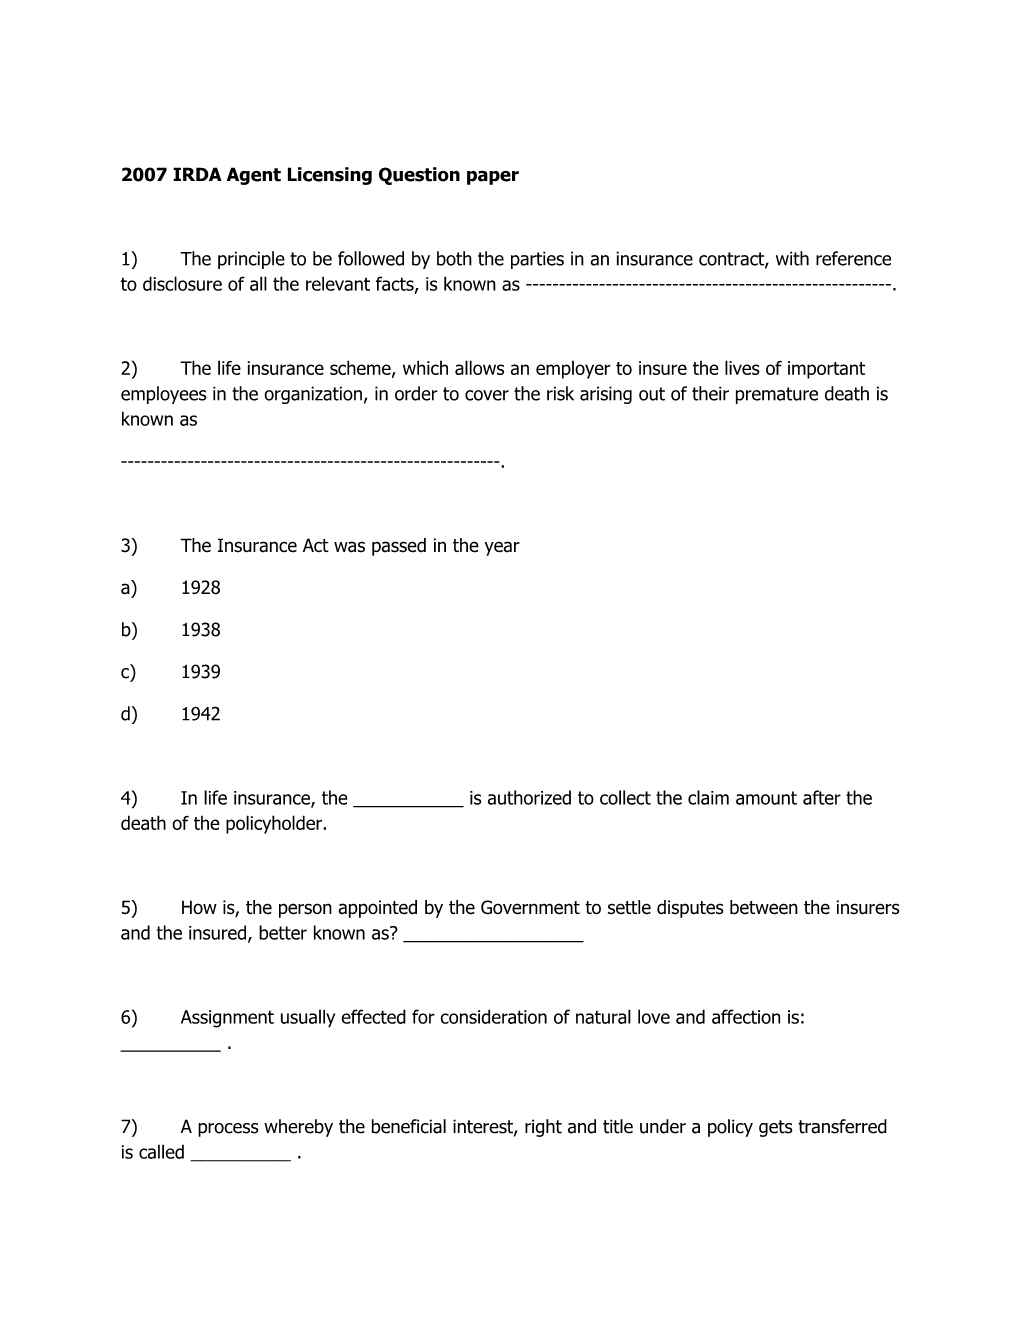 2007 IRDA Agent Licensing Question Paper